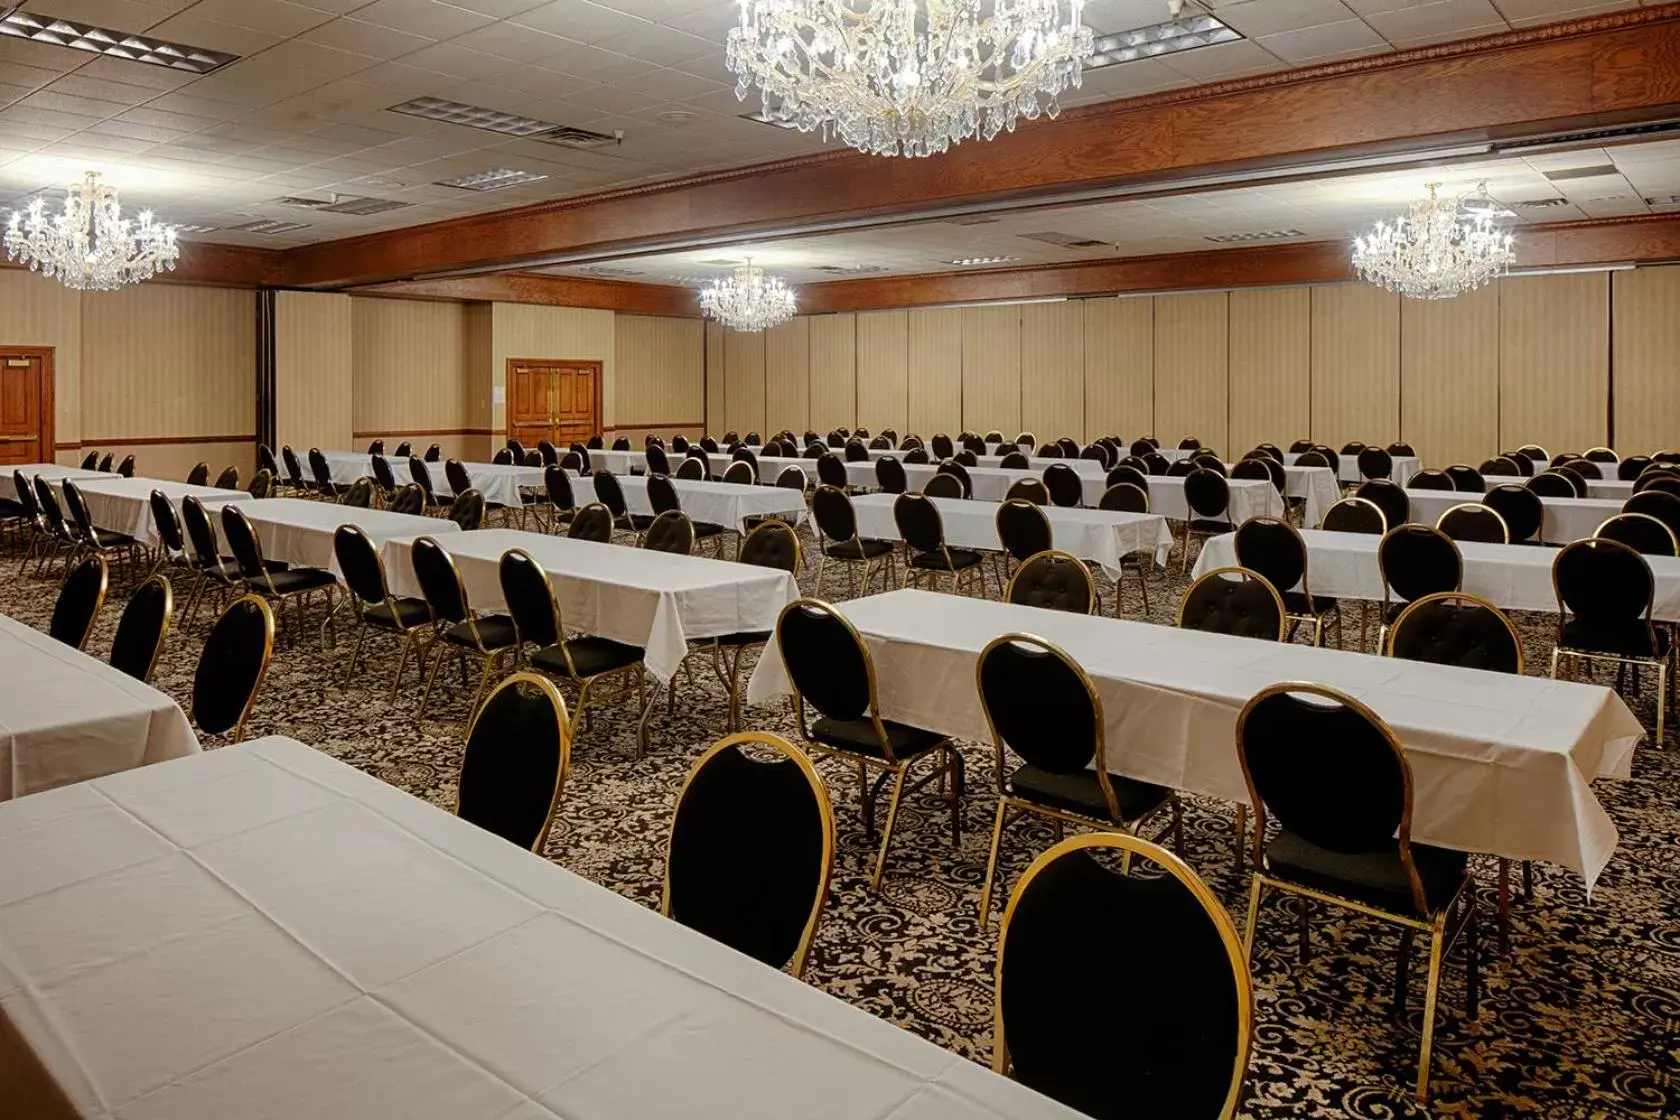 Area and facilities in Red Lion Hotel Pocatello